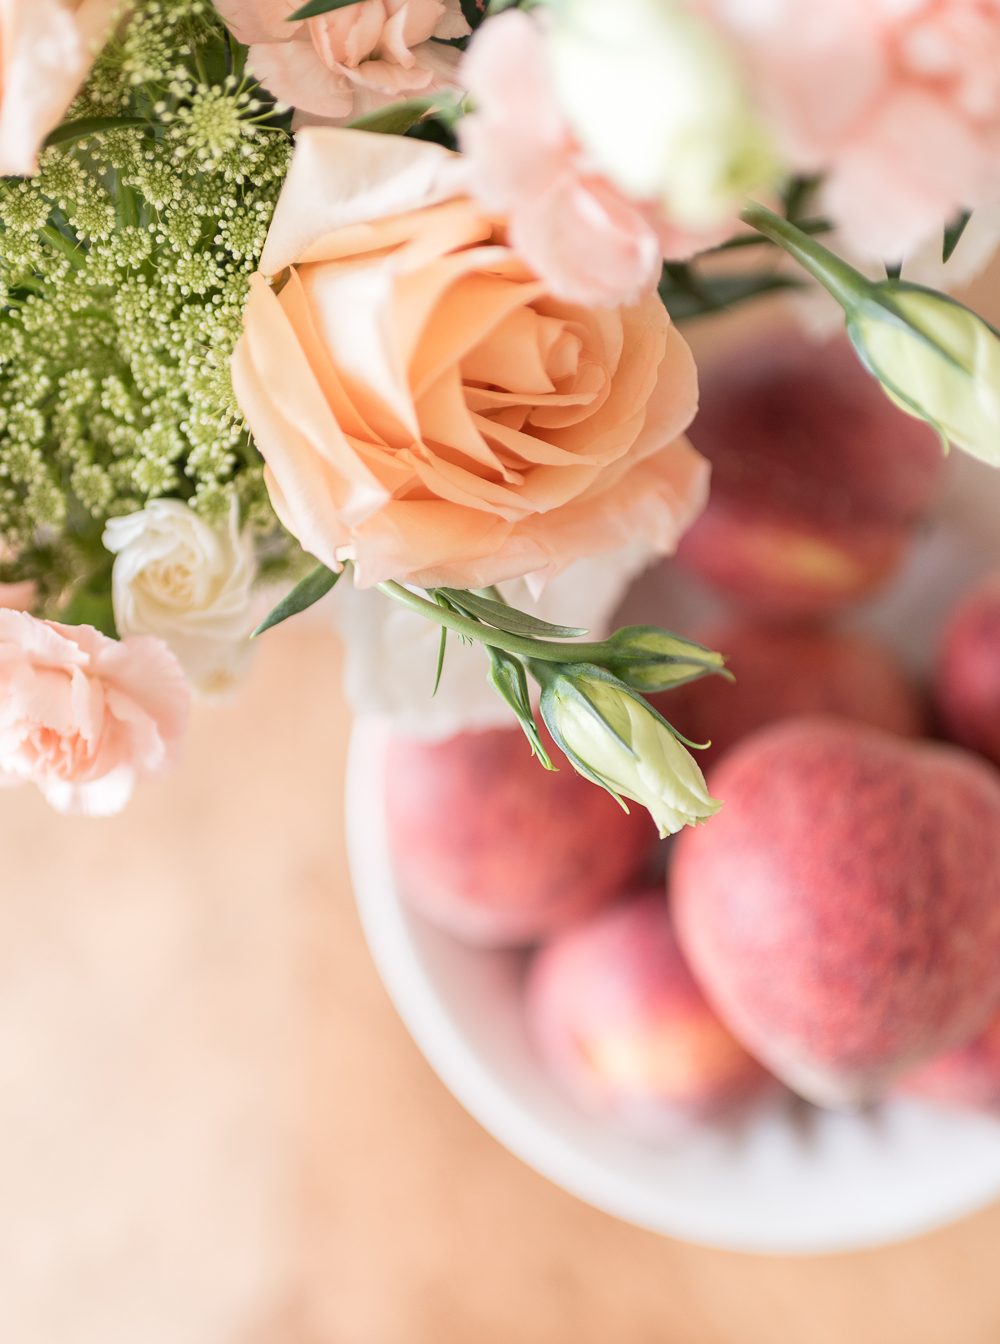 Fresh flowers in soft peach, blush and cream hues paired with a bowl of juicy peaches make an effortless centerpiece for a simple summer gathering.